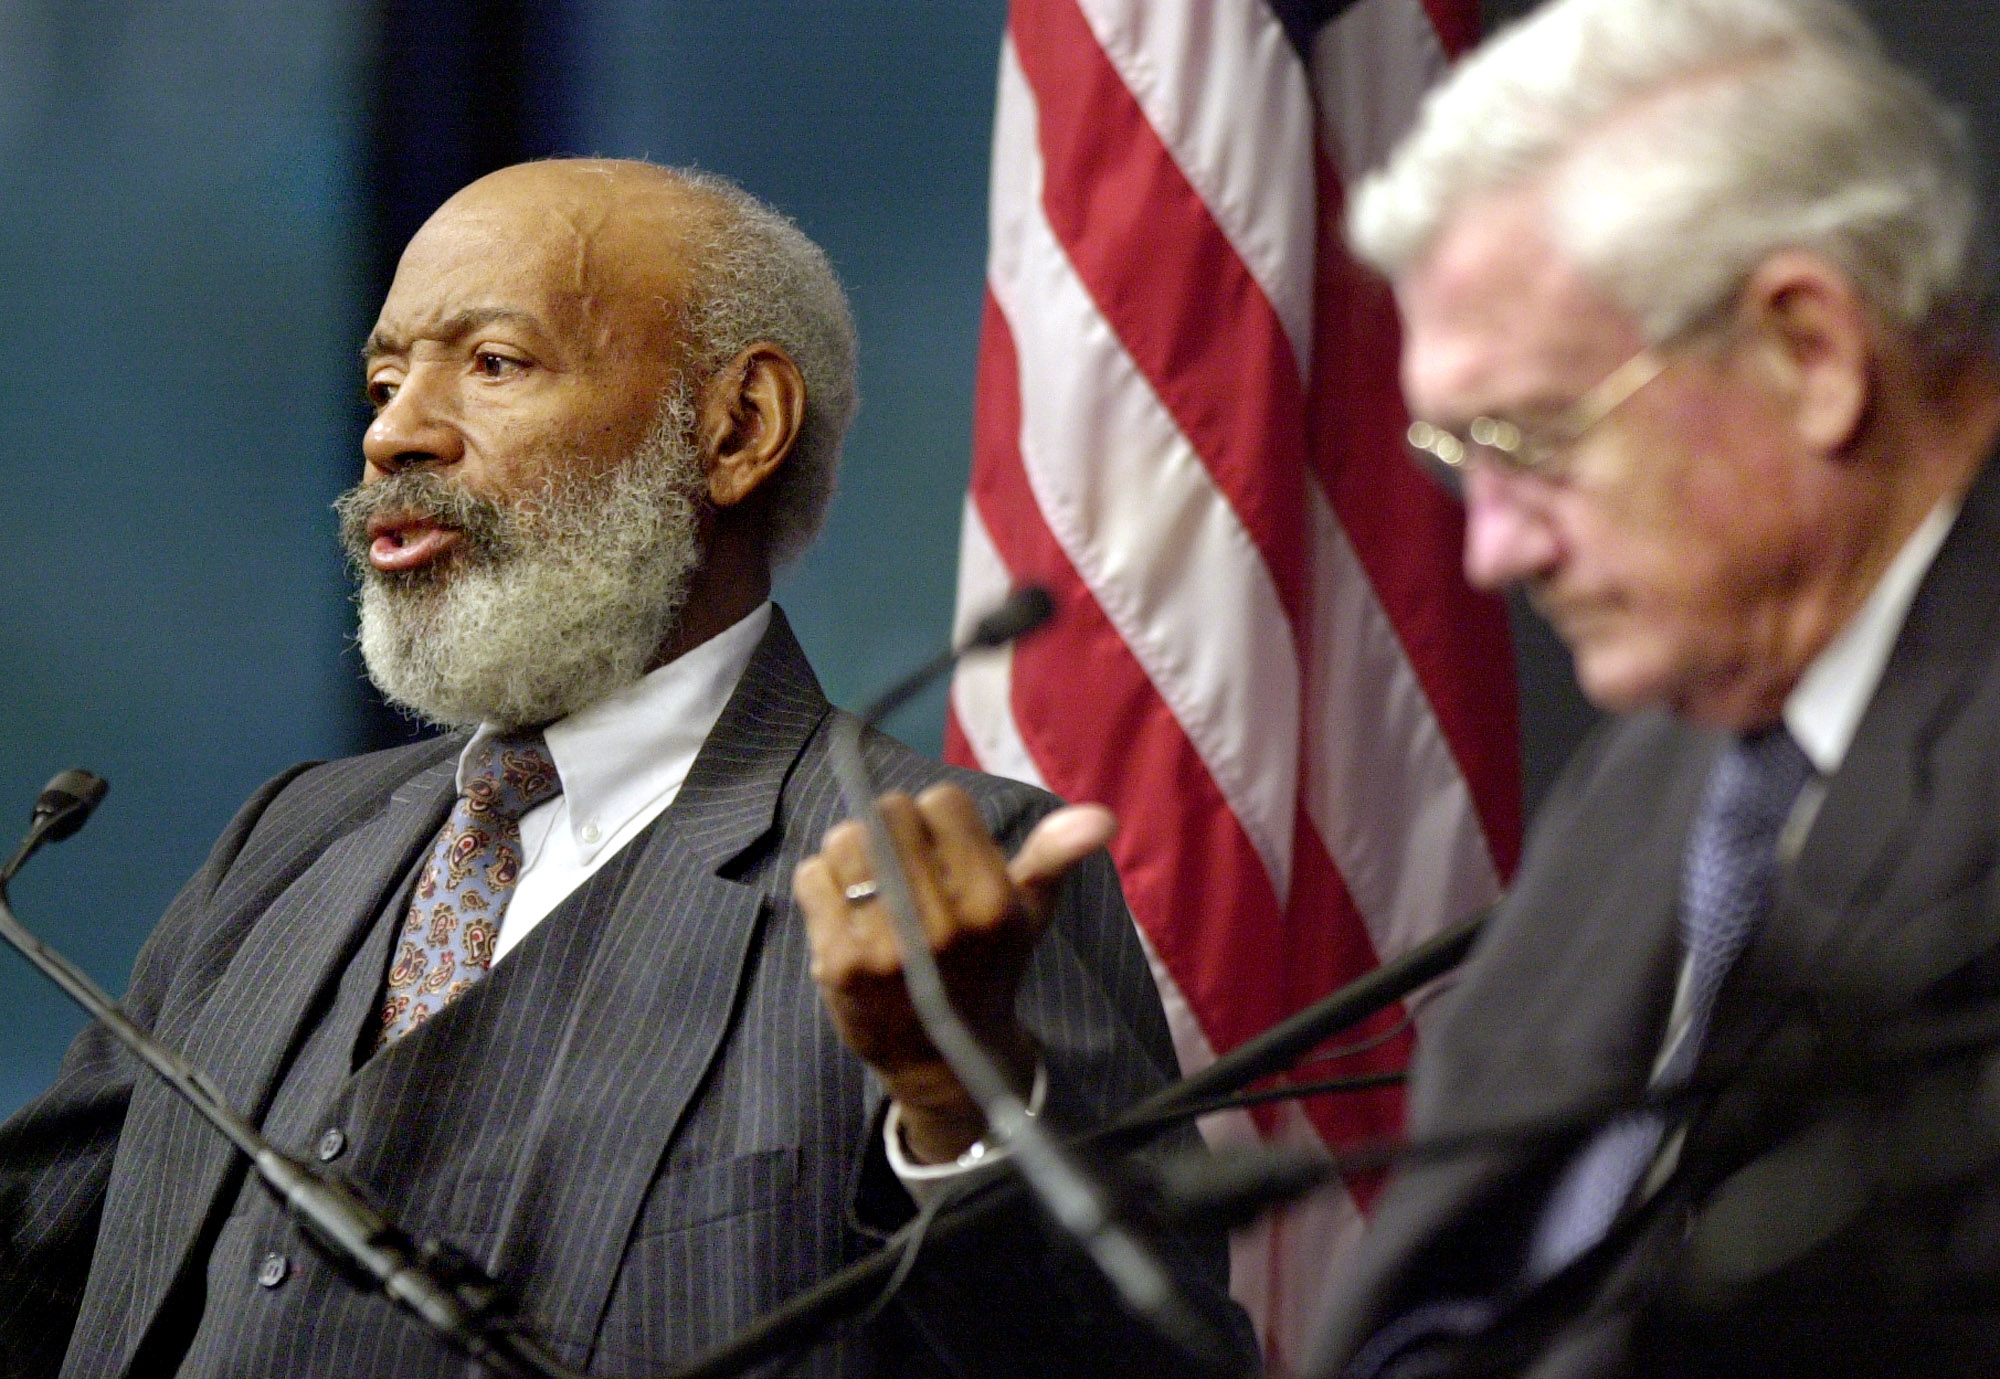 James Meredith, left, speaks to the audience as former Justice Department attorney John Doar, right, looks on during a forum in Boston in 2002. It was the last time Doar and Meredith saw each other. (AP Photo/Steven Senne)